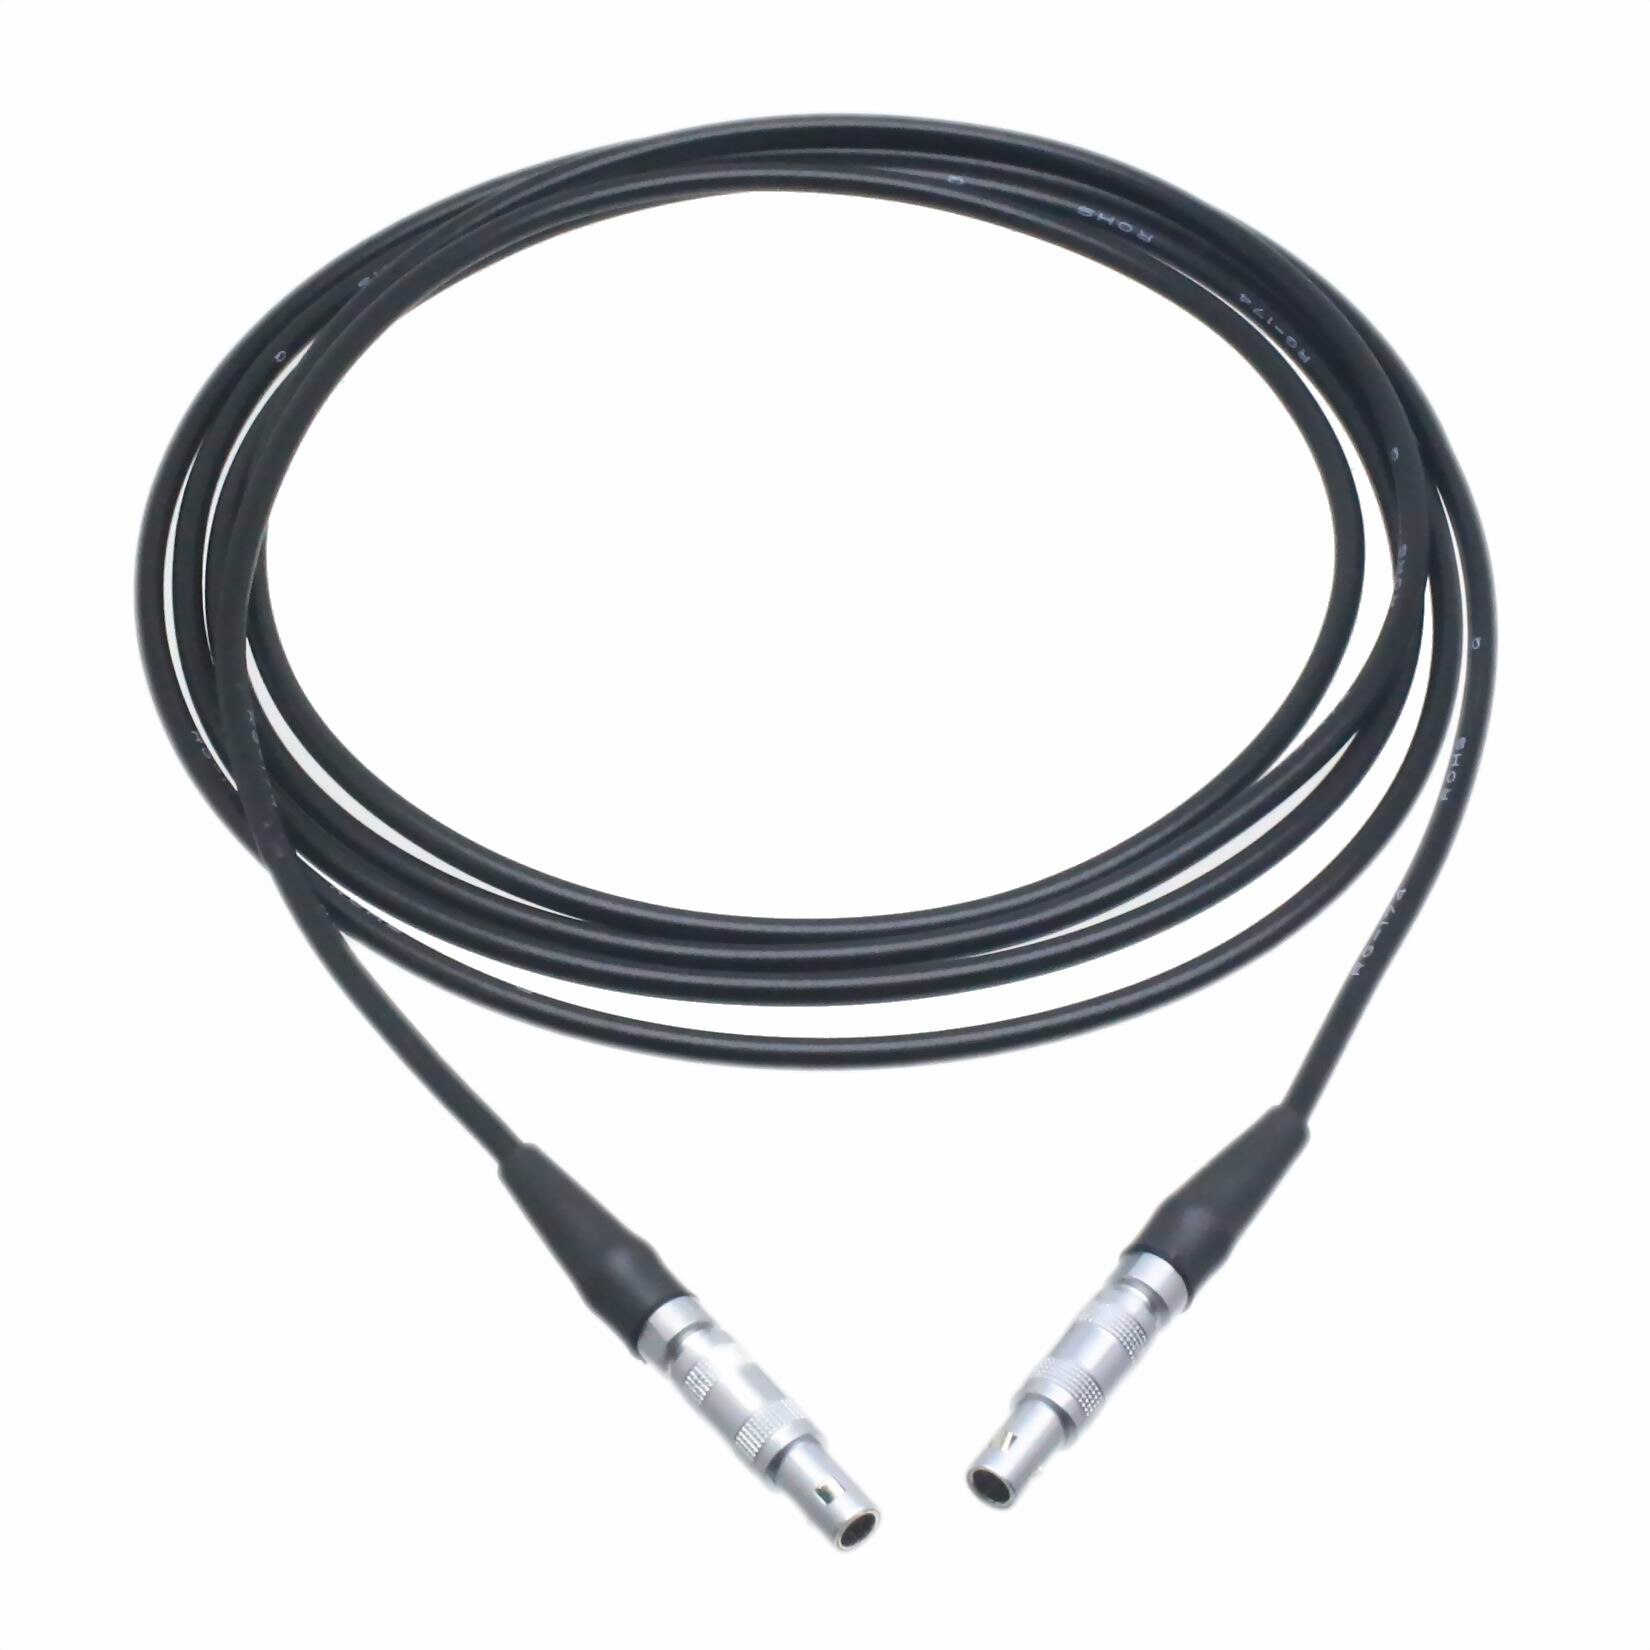 Cable Lemo 1 to 00 M/M Equivalent For MPKL2 Ultrasonic TOFD NDT 6.5FT transducer 